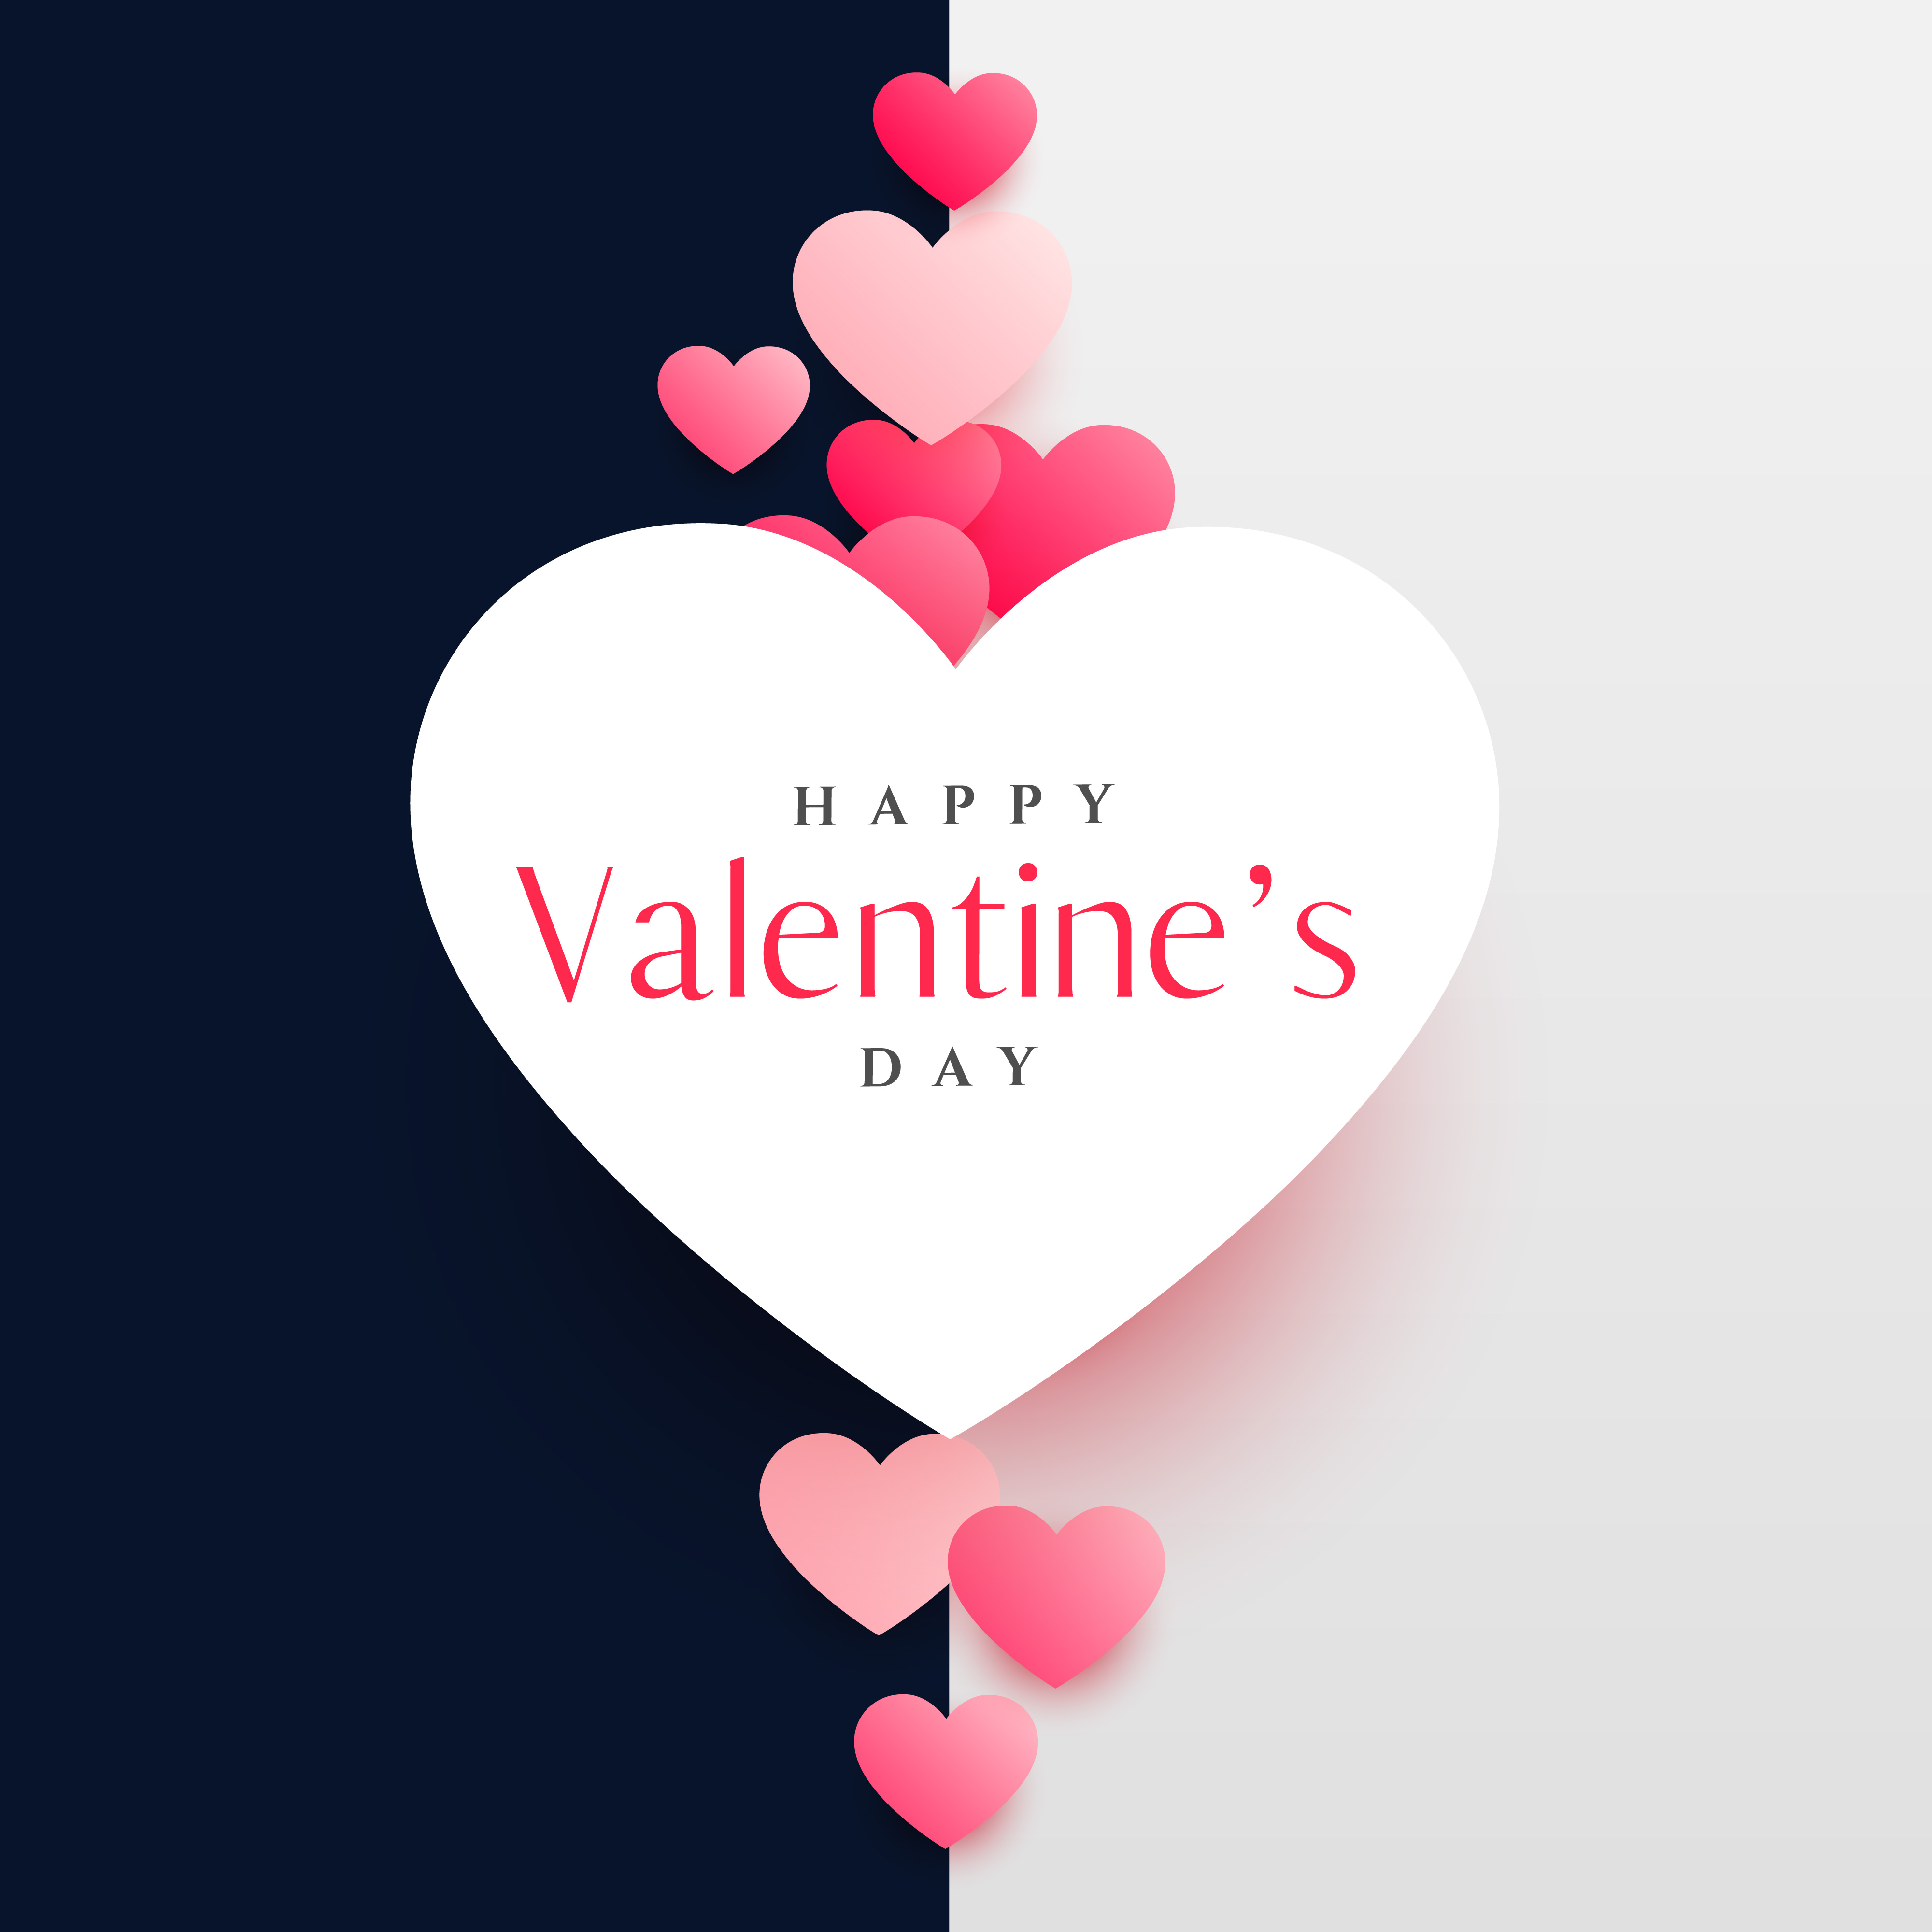 modern happy valentine's day greeting card design template - Download Free Vector Art ...4000 x 4000